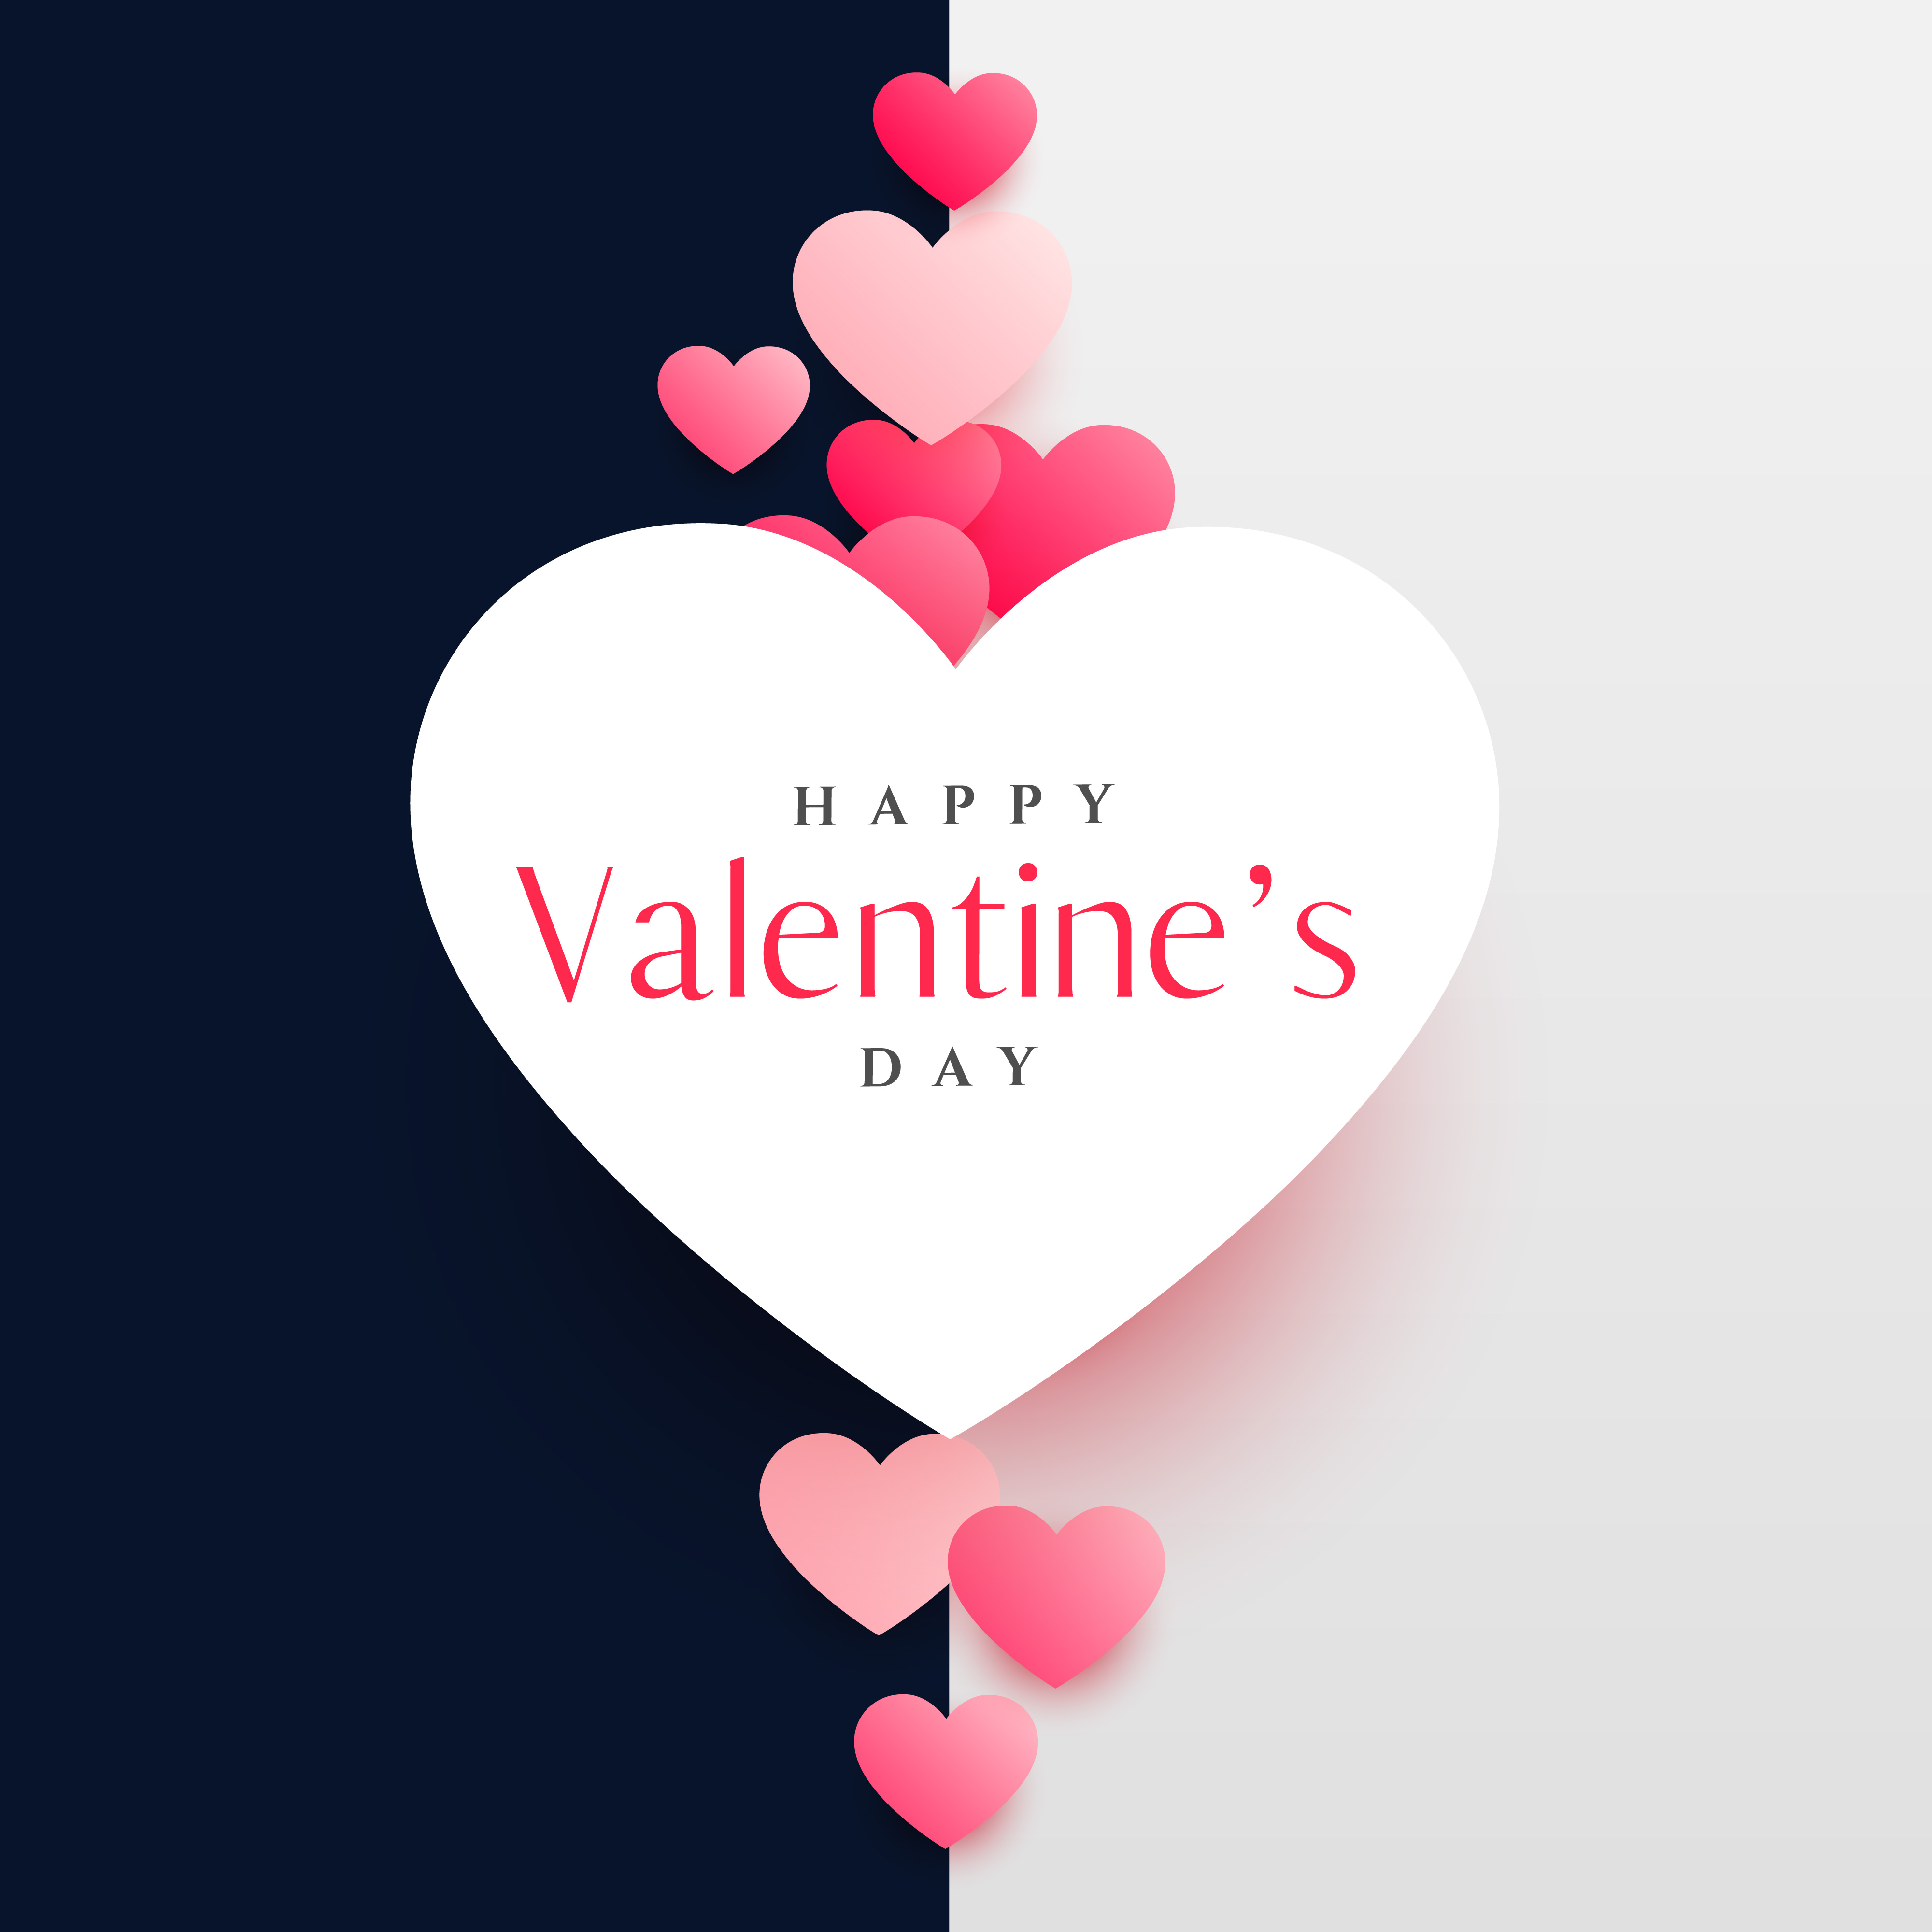 modern happy valentine's day greeting card design template - Download Free Vector Art ...4000 x 4000